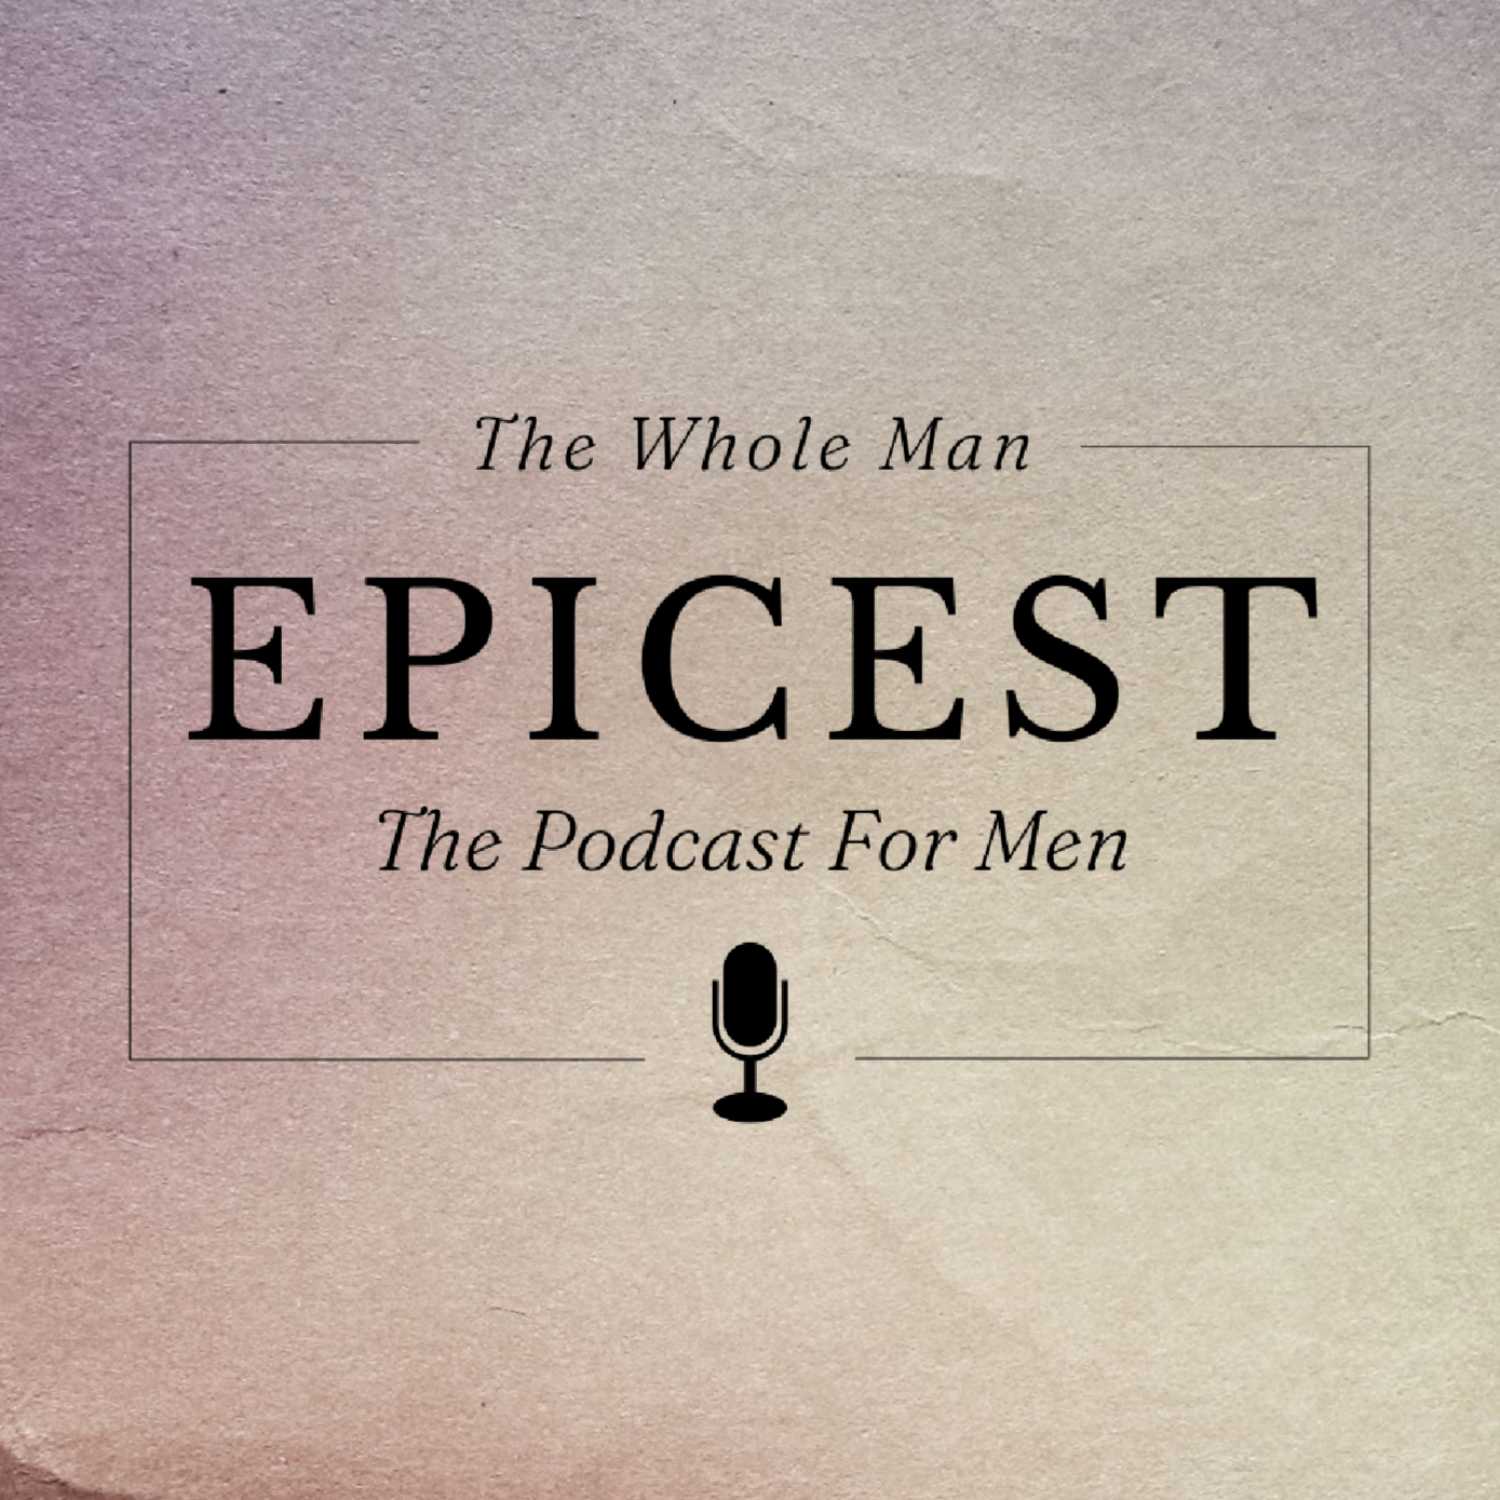 Epicest Podcast